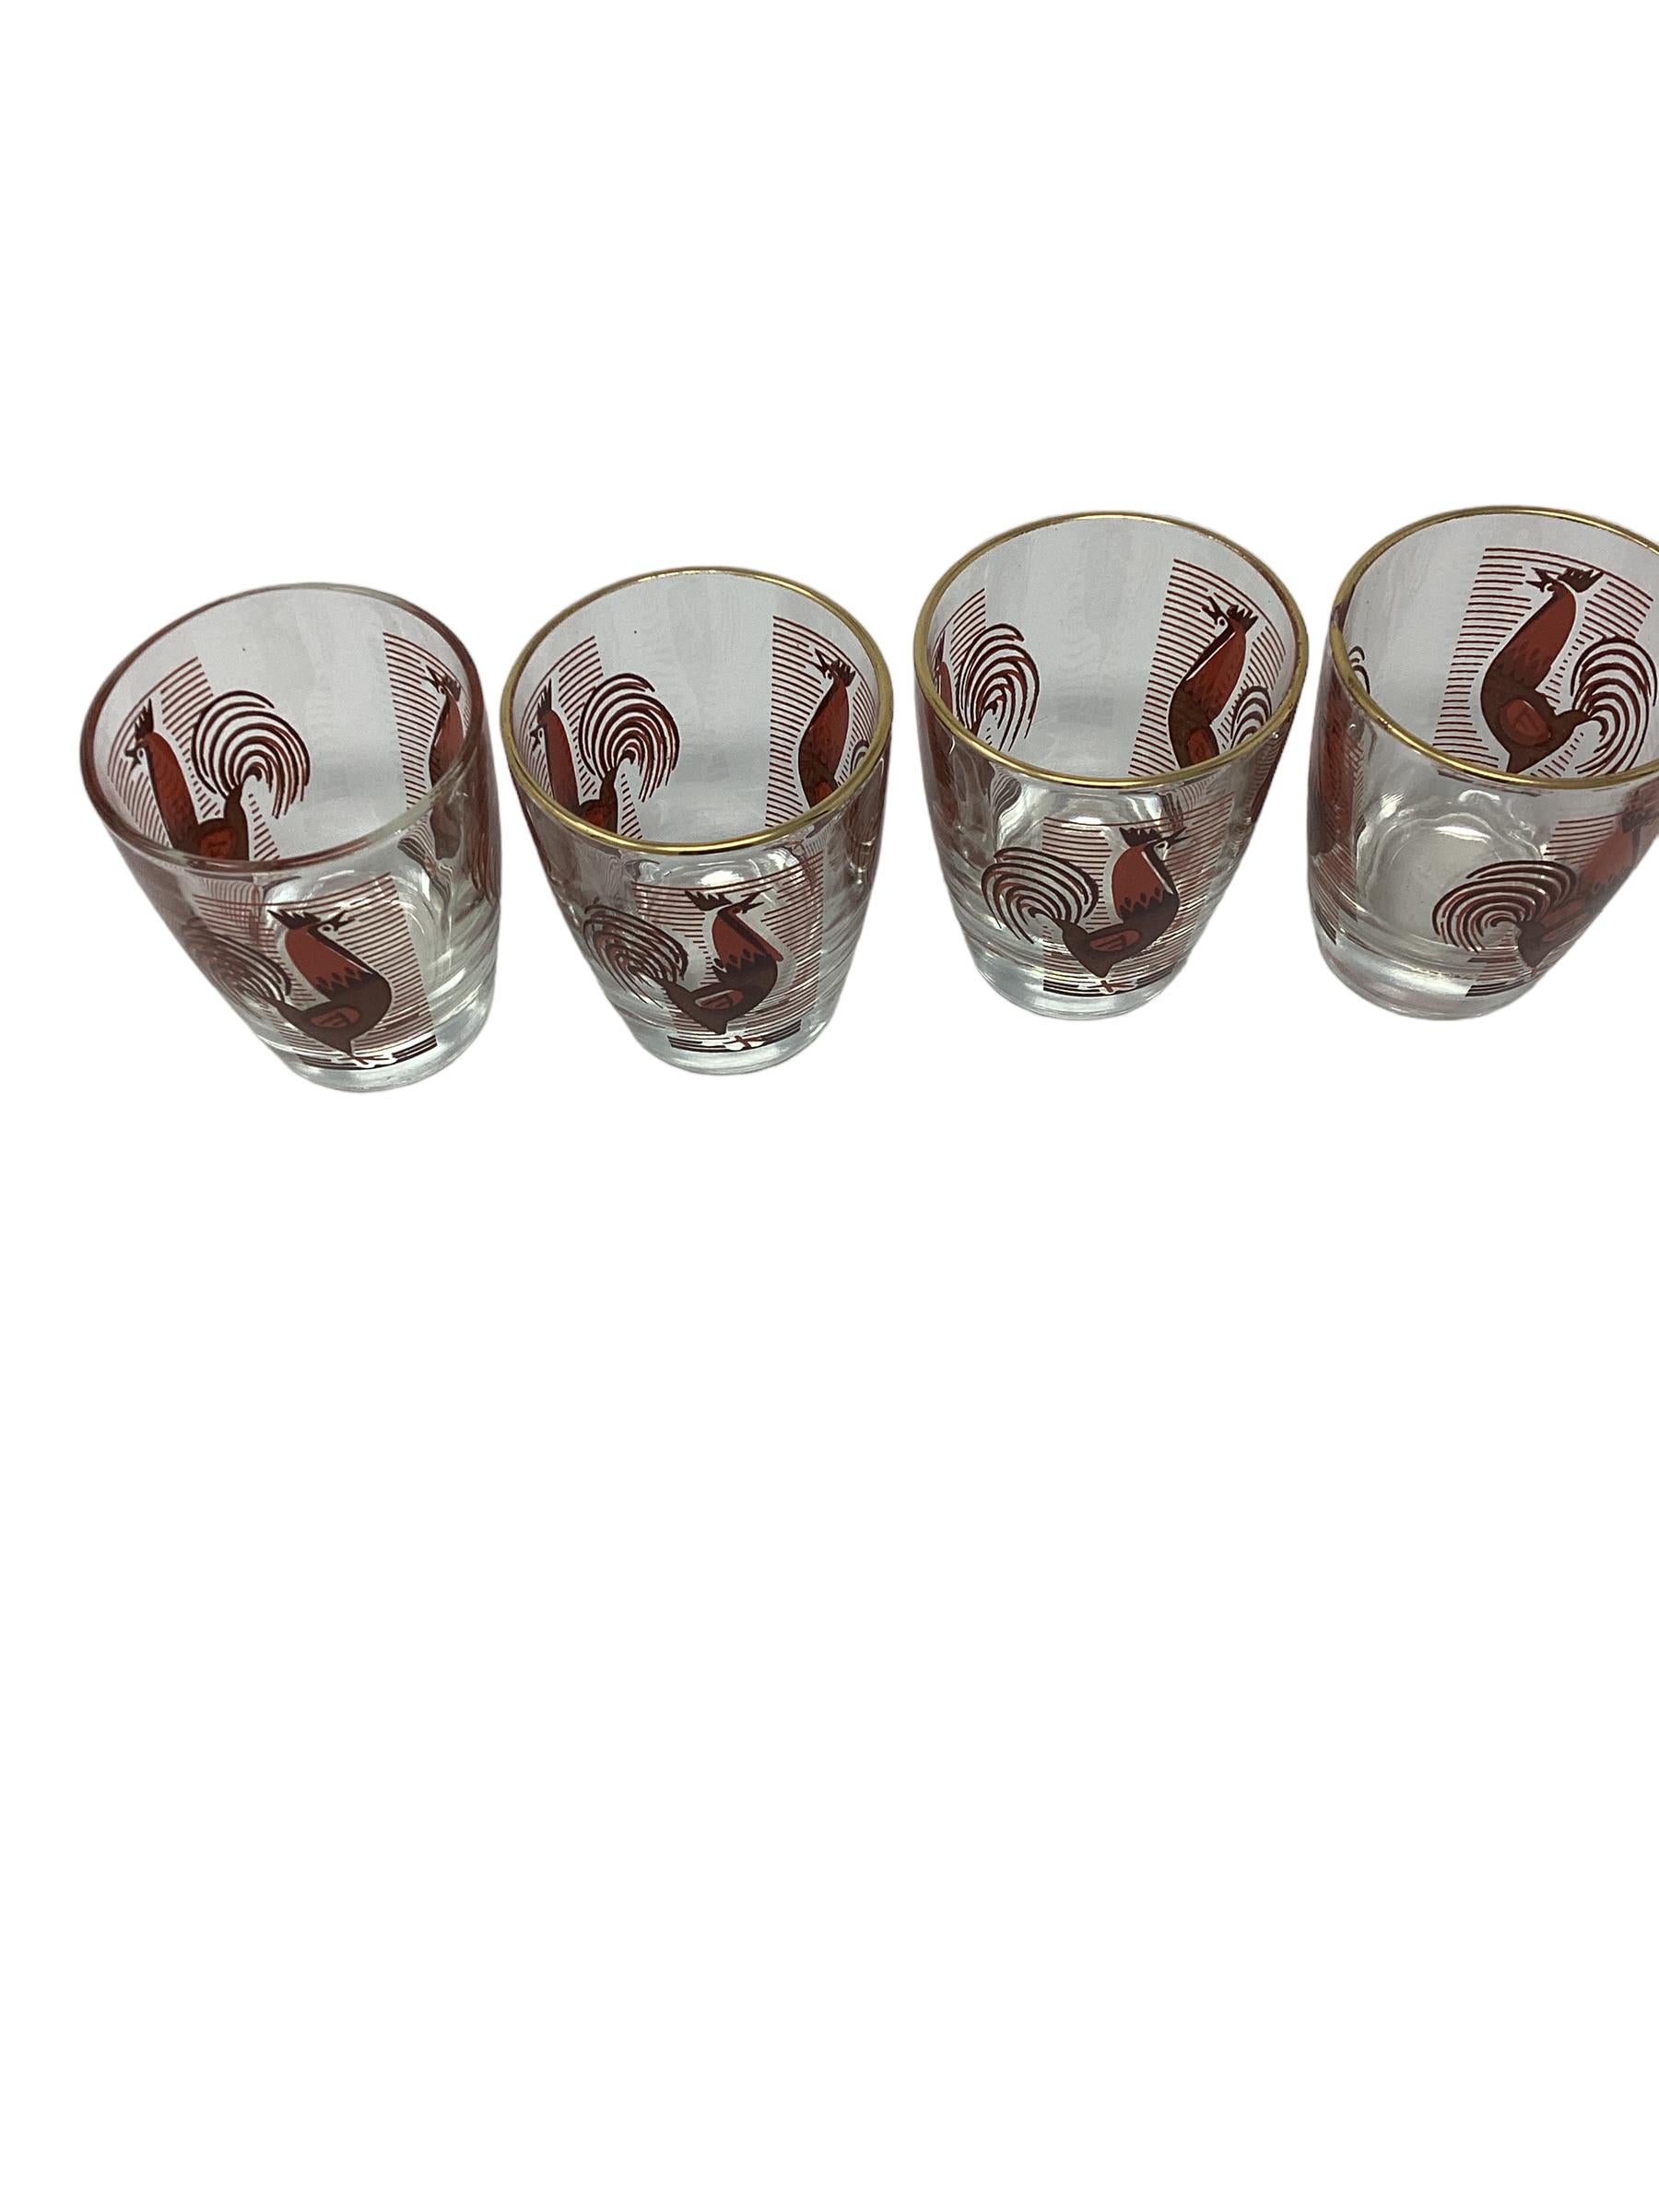 Vintage Art Deco 5 Piece Dyball Cocktail Set with Stylized Rooster For Sale 2